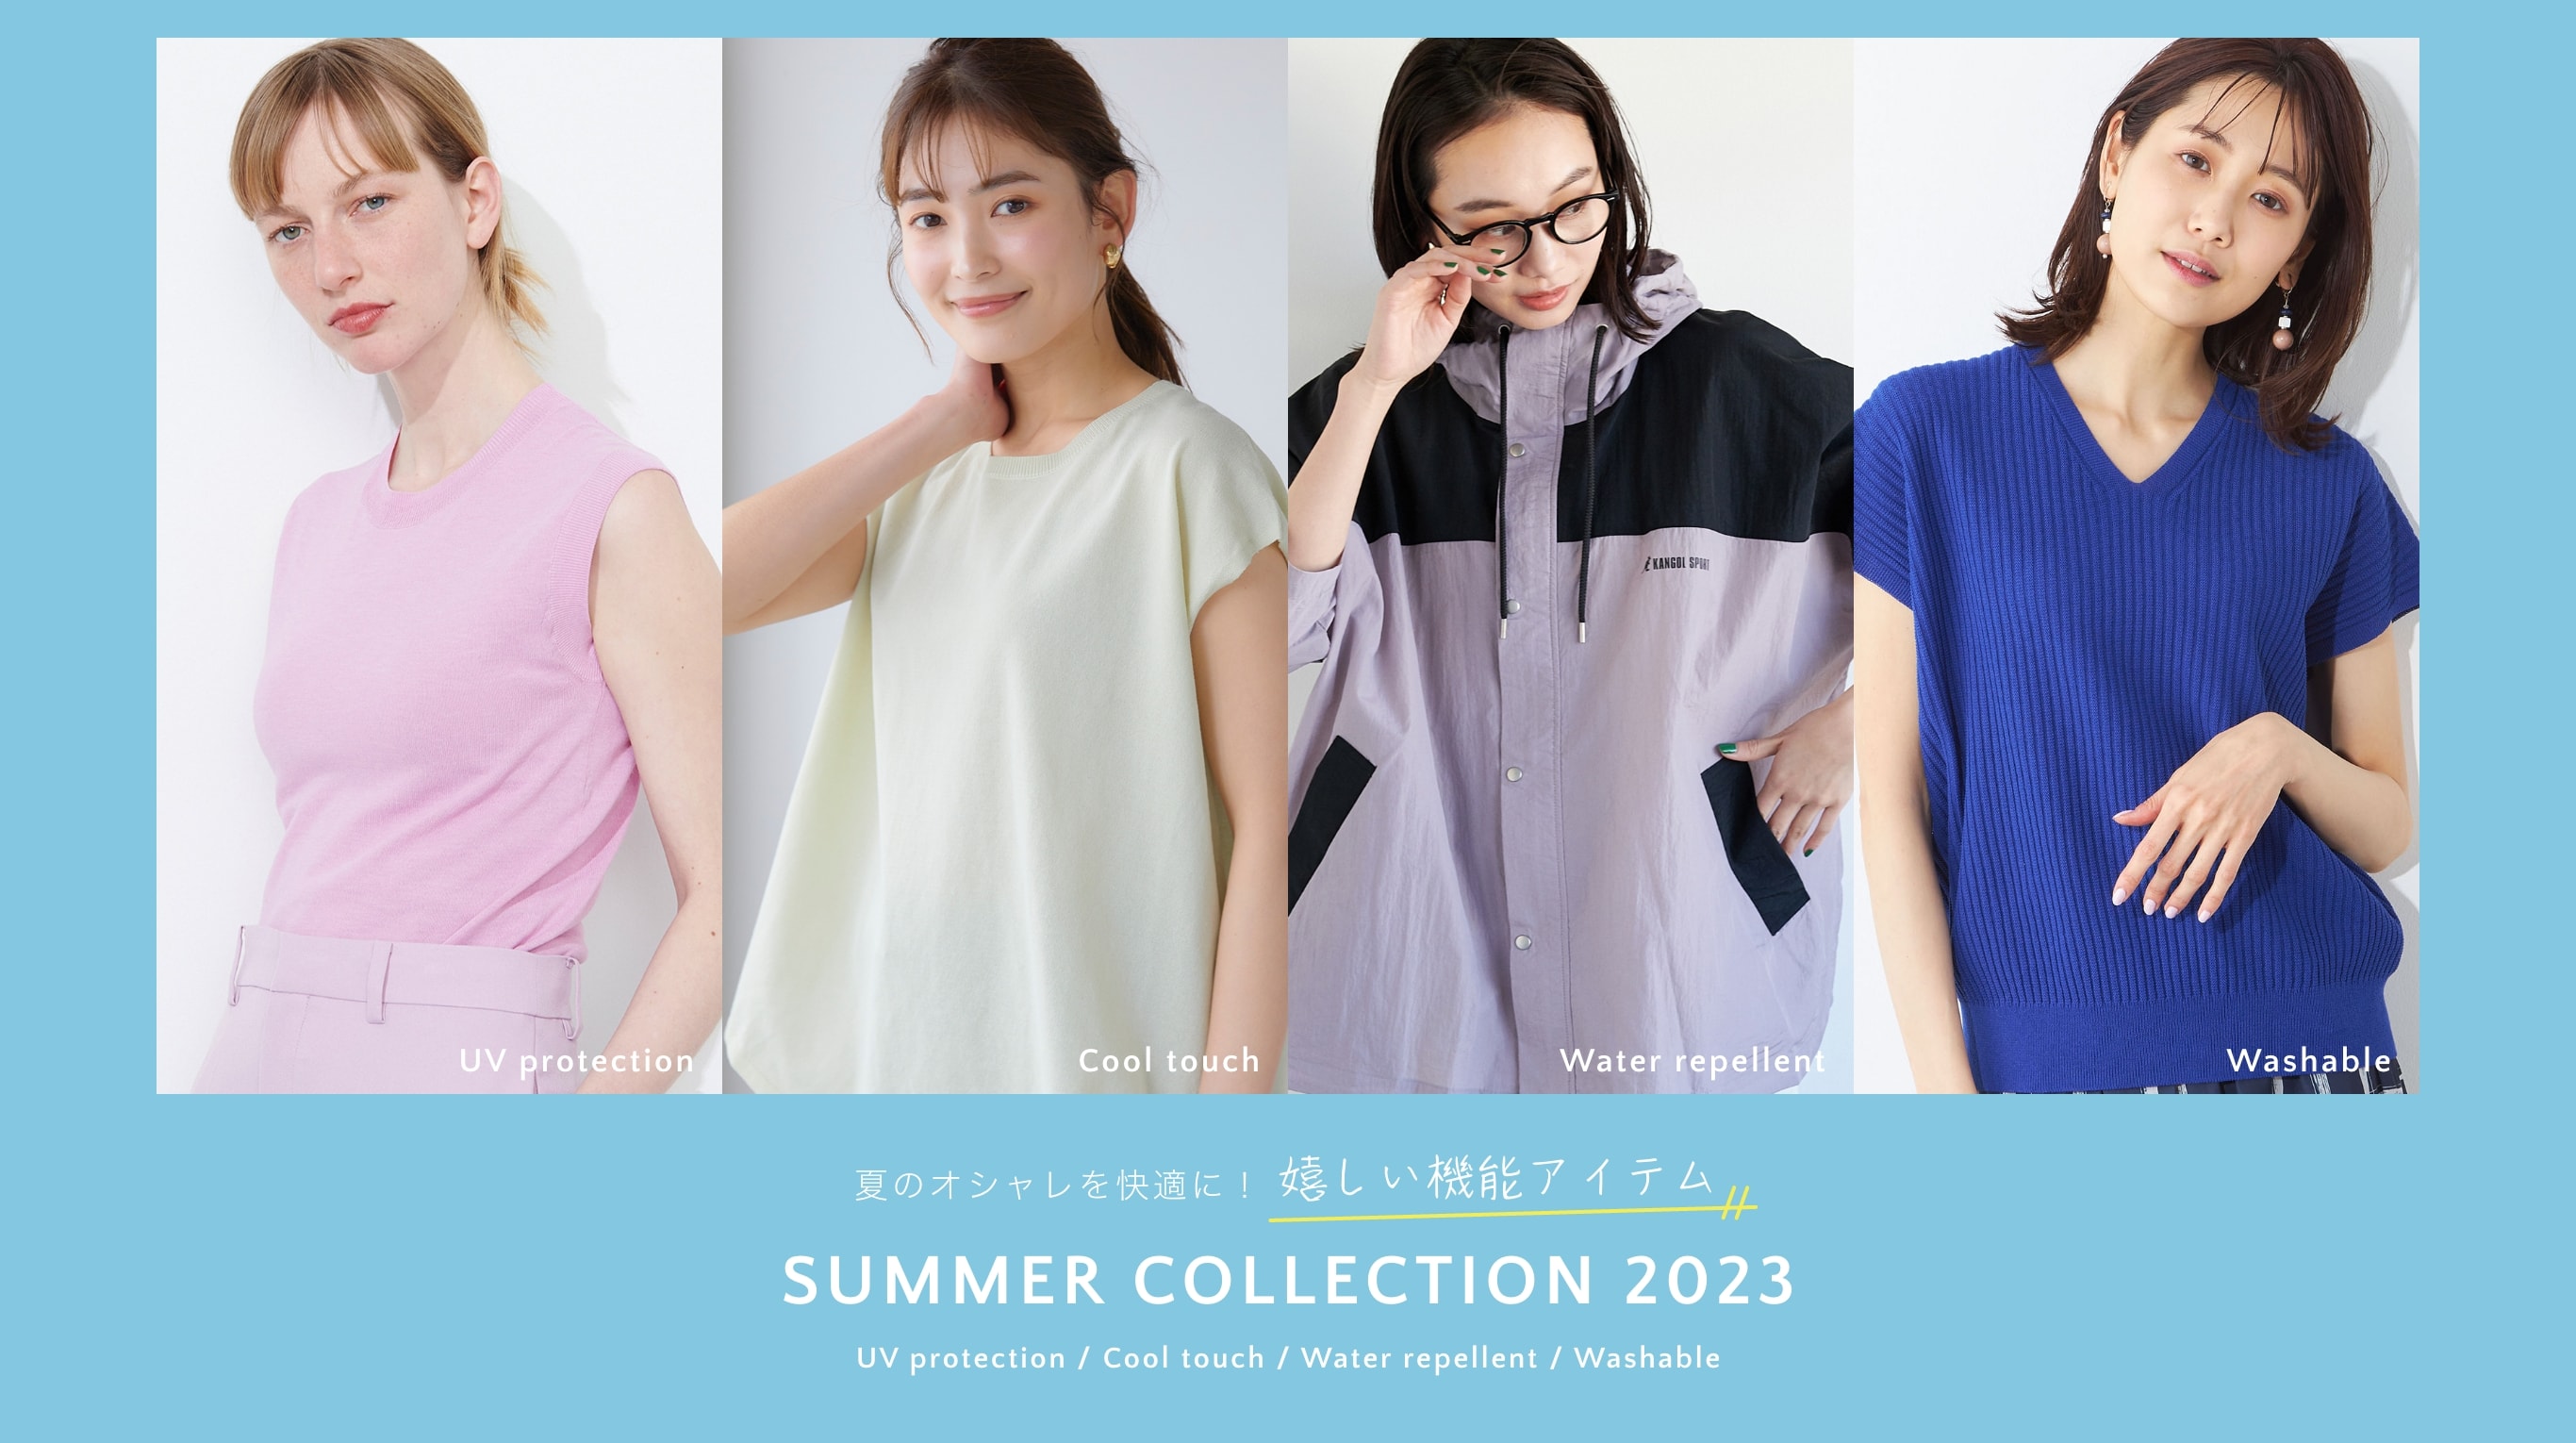 SUMMER COLLECTION 2023